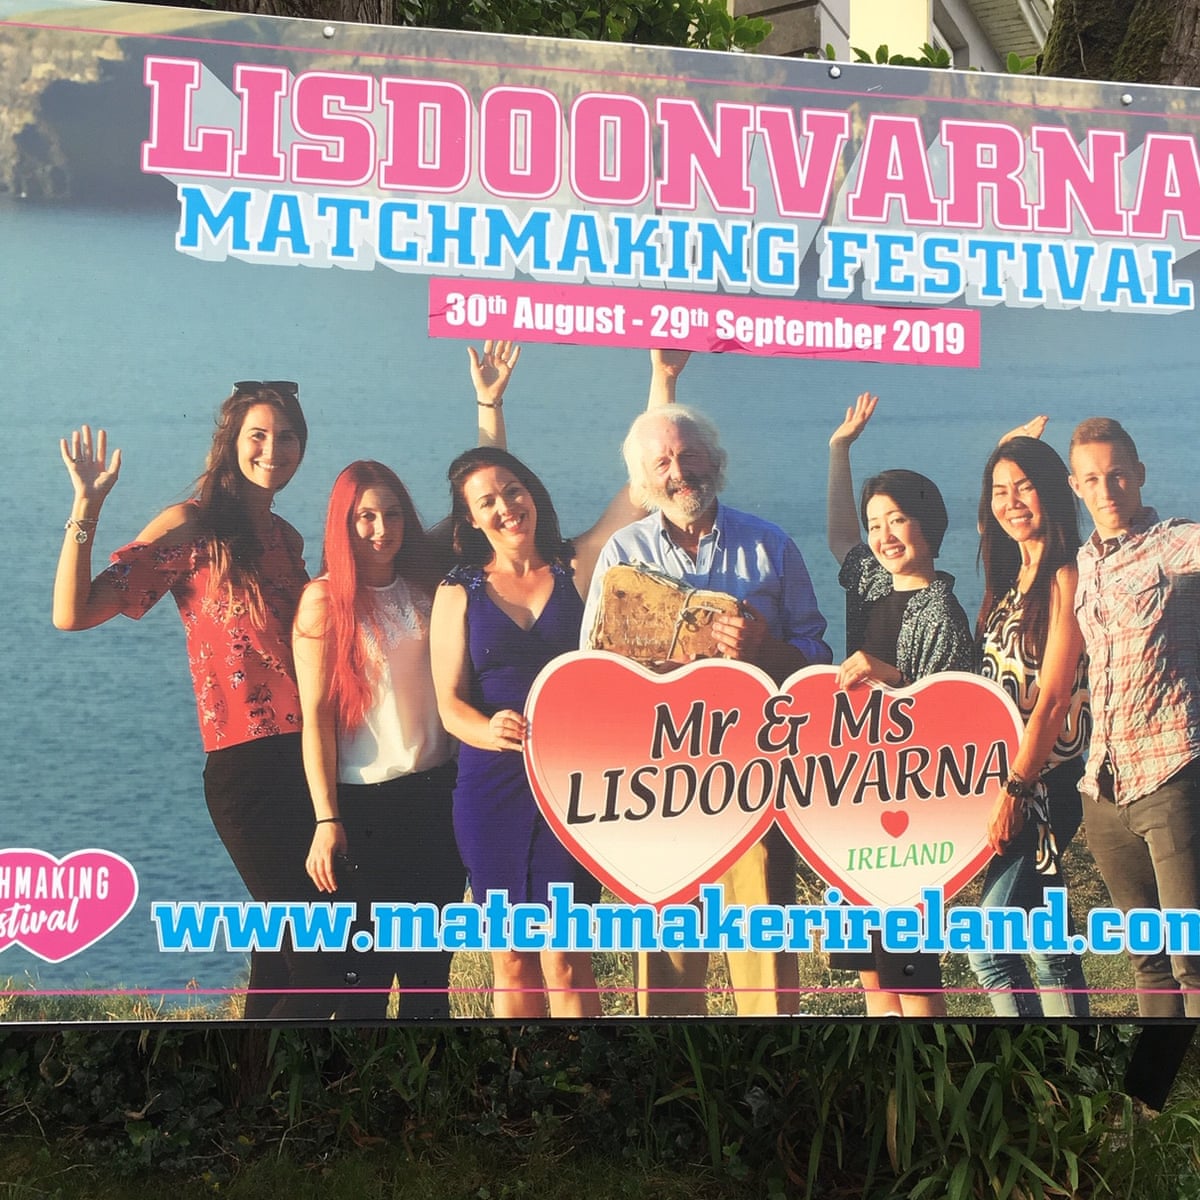 Singles Matchmaking Meeting and Dating through Irelands 